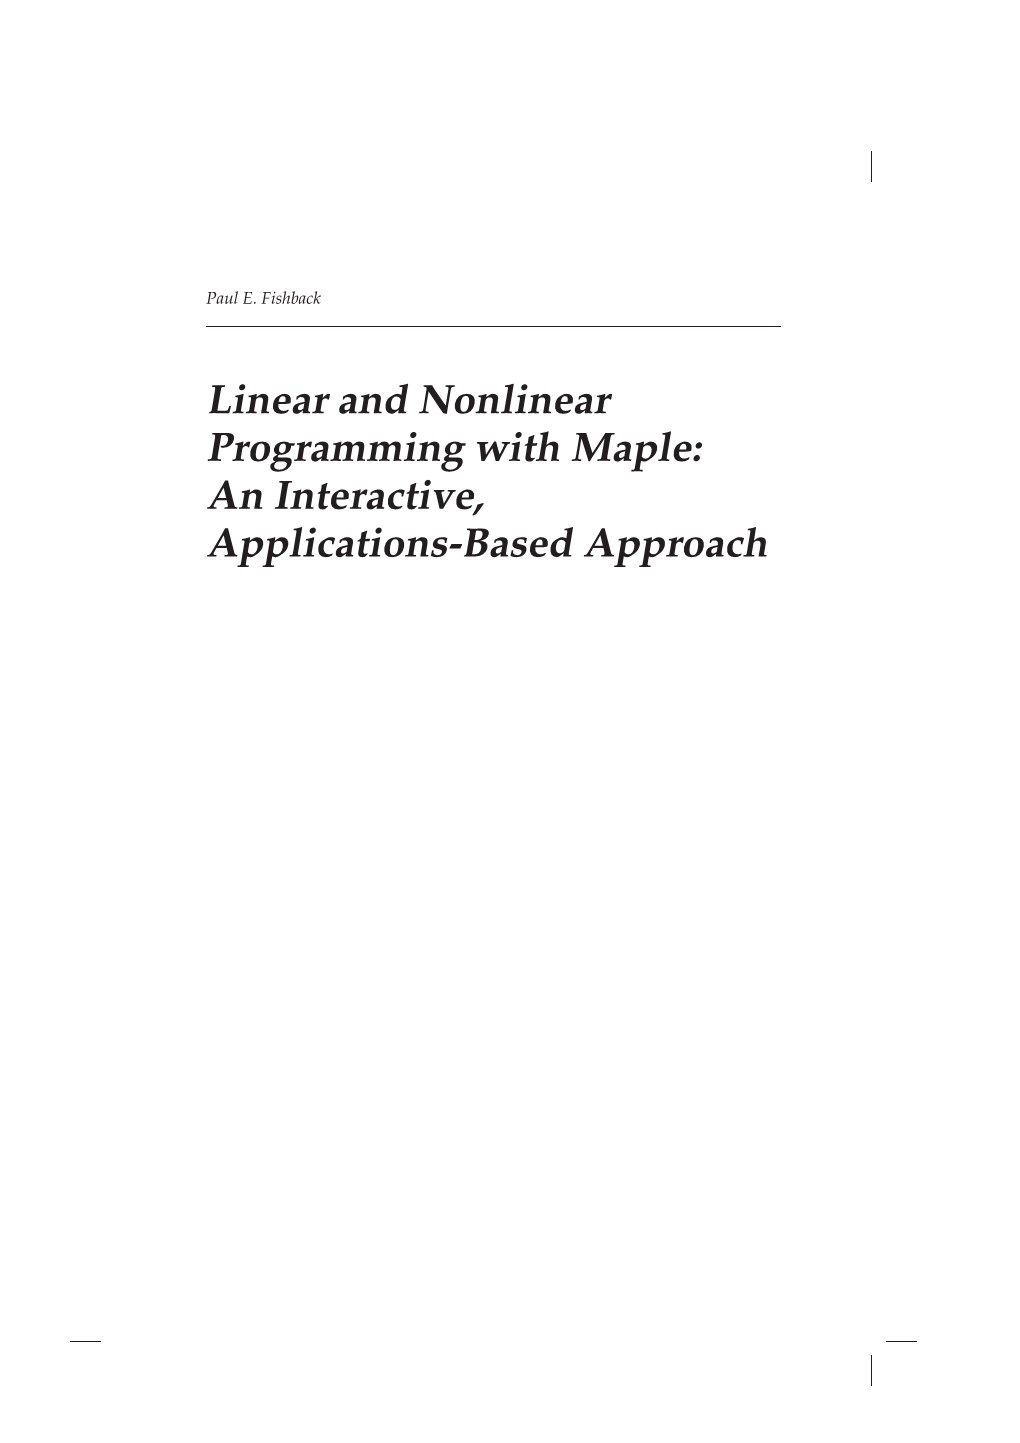 Linear and Nonlinear Programming with Maple: an Interactive, Applications-Based Approach